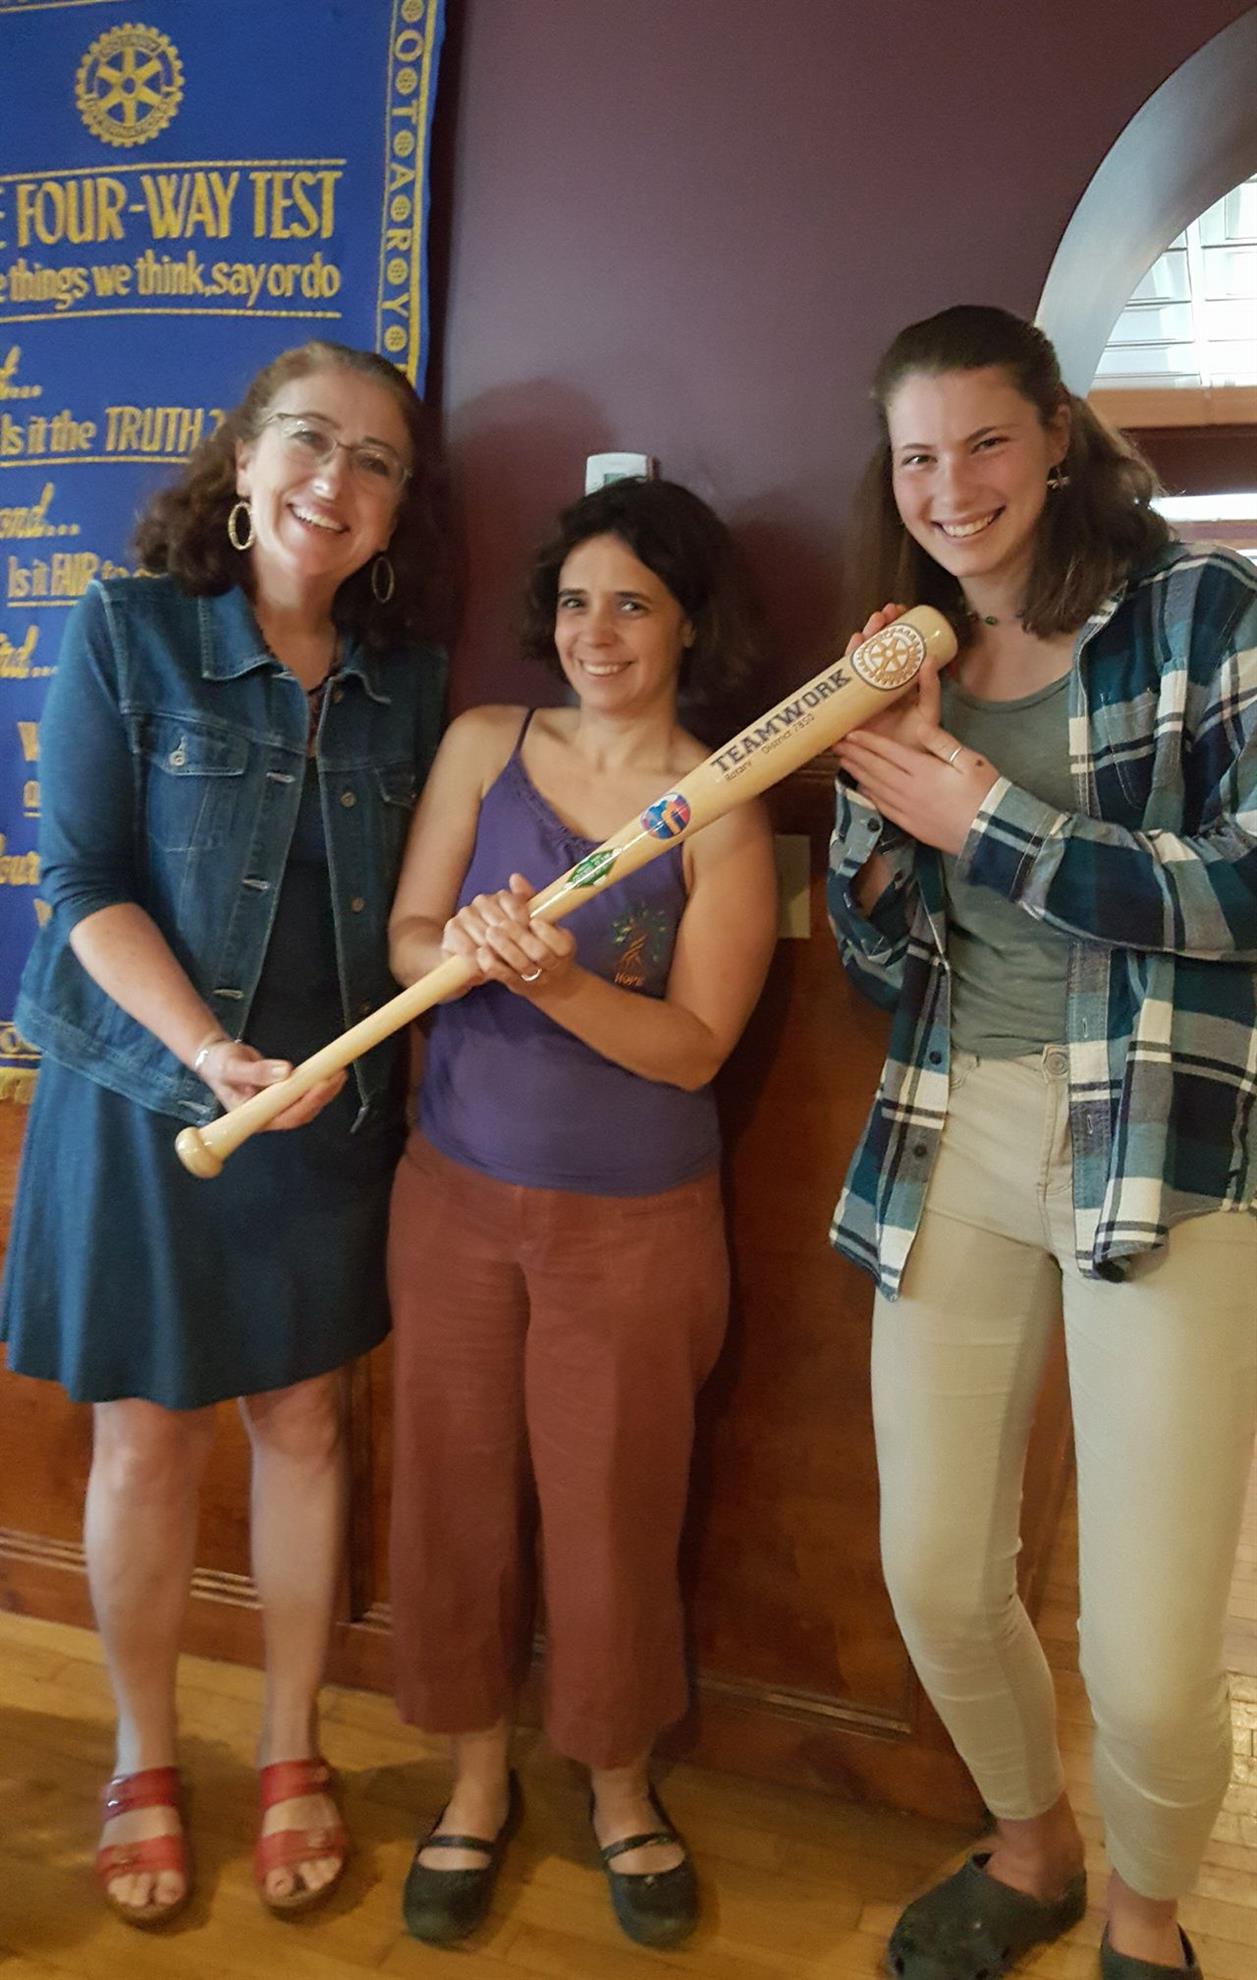 The Planting Hope team with our Teamwork baseball bat